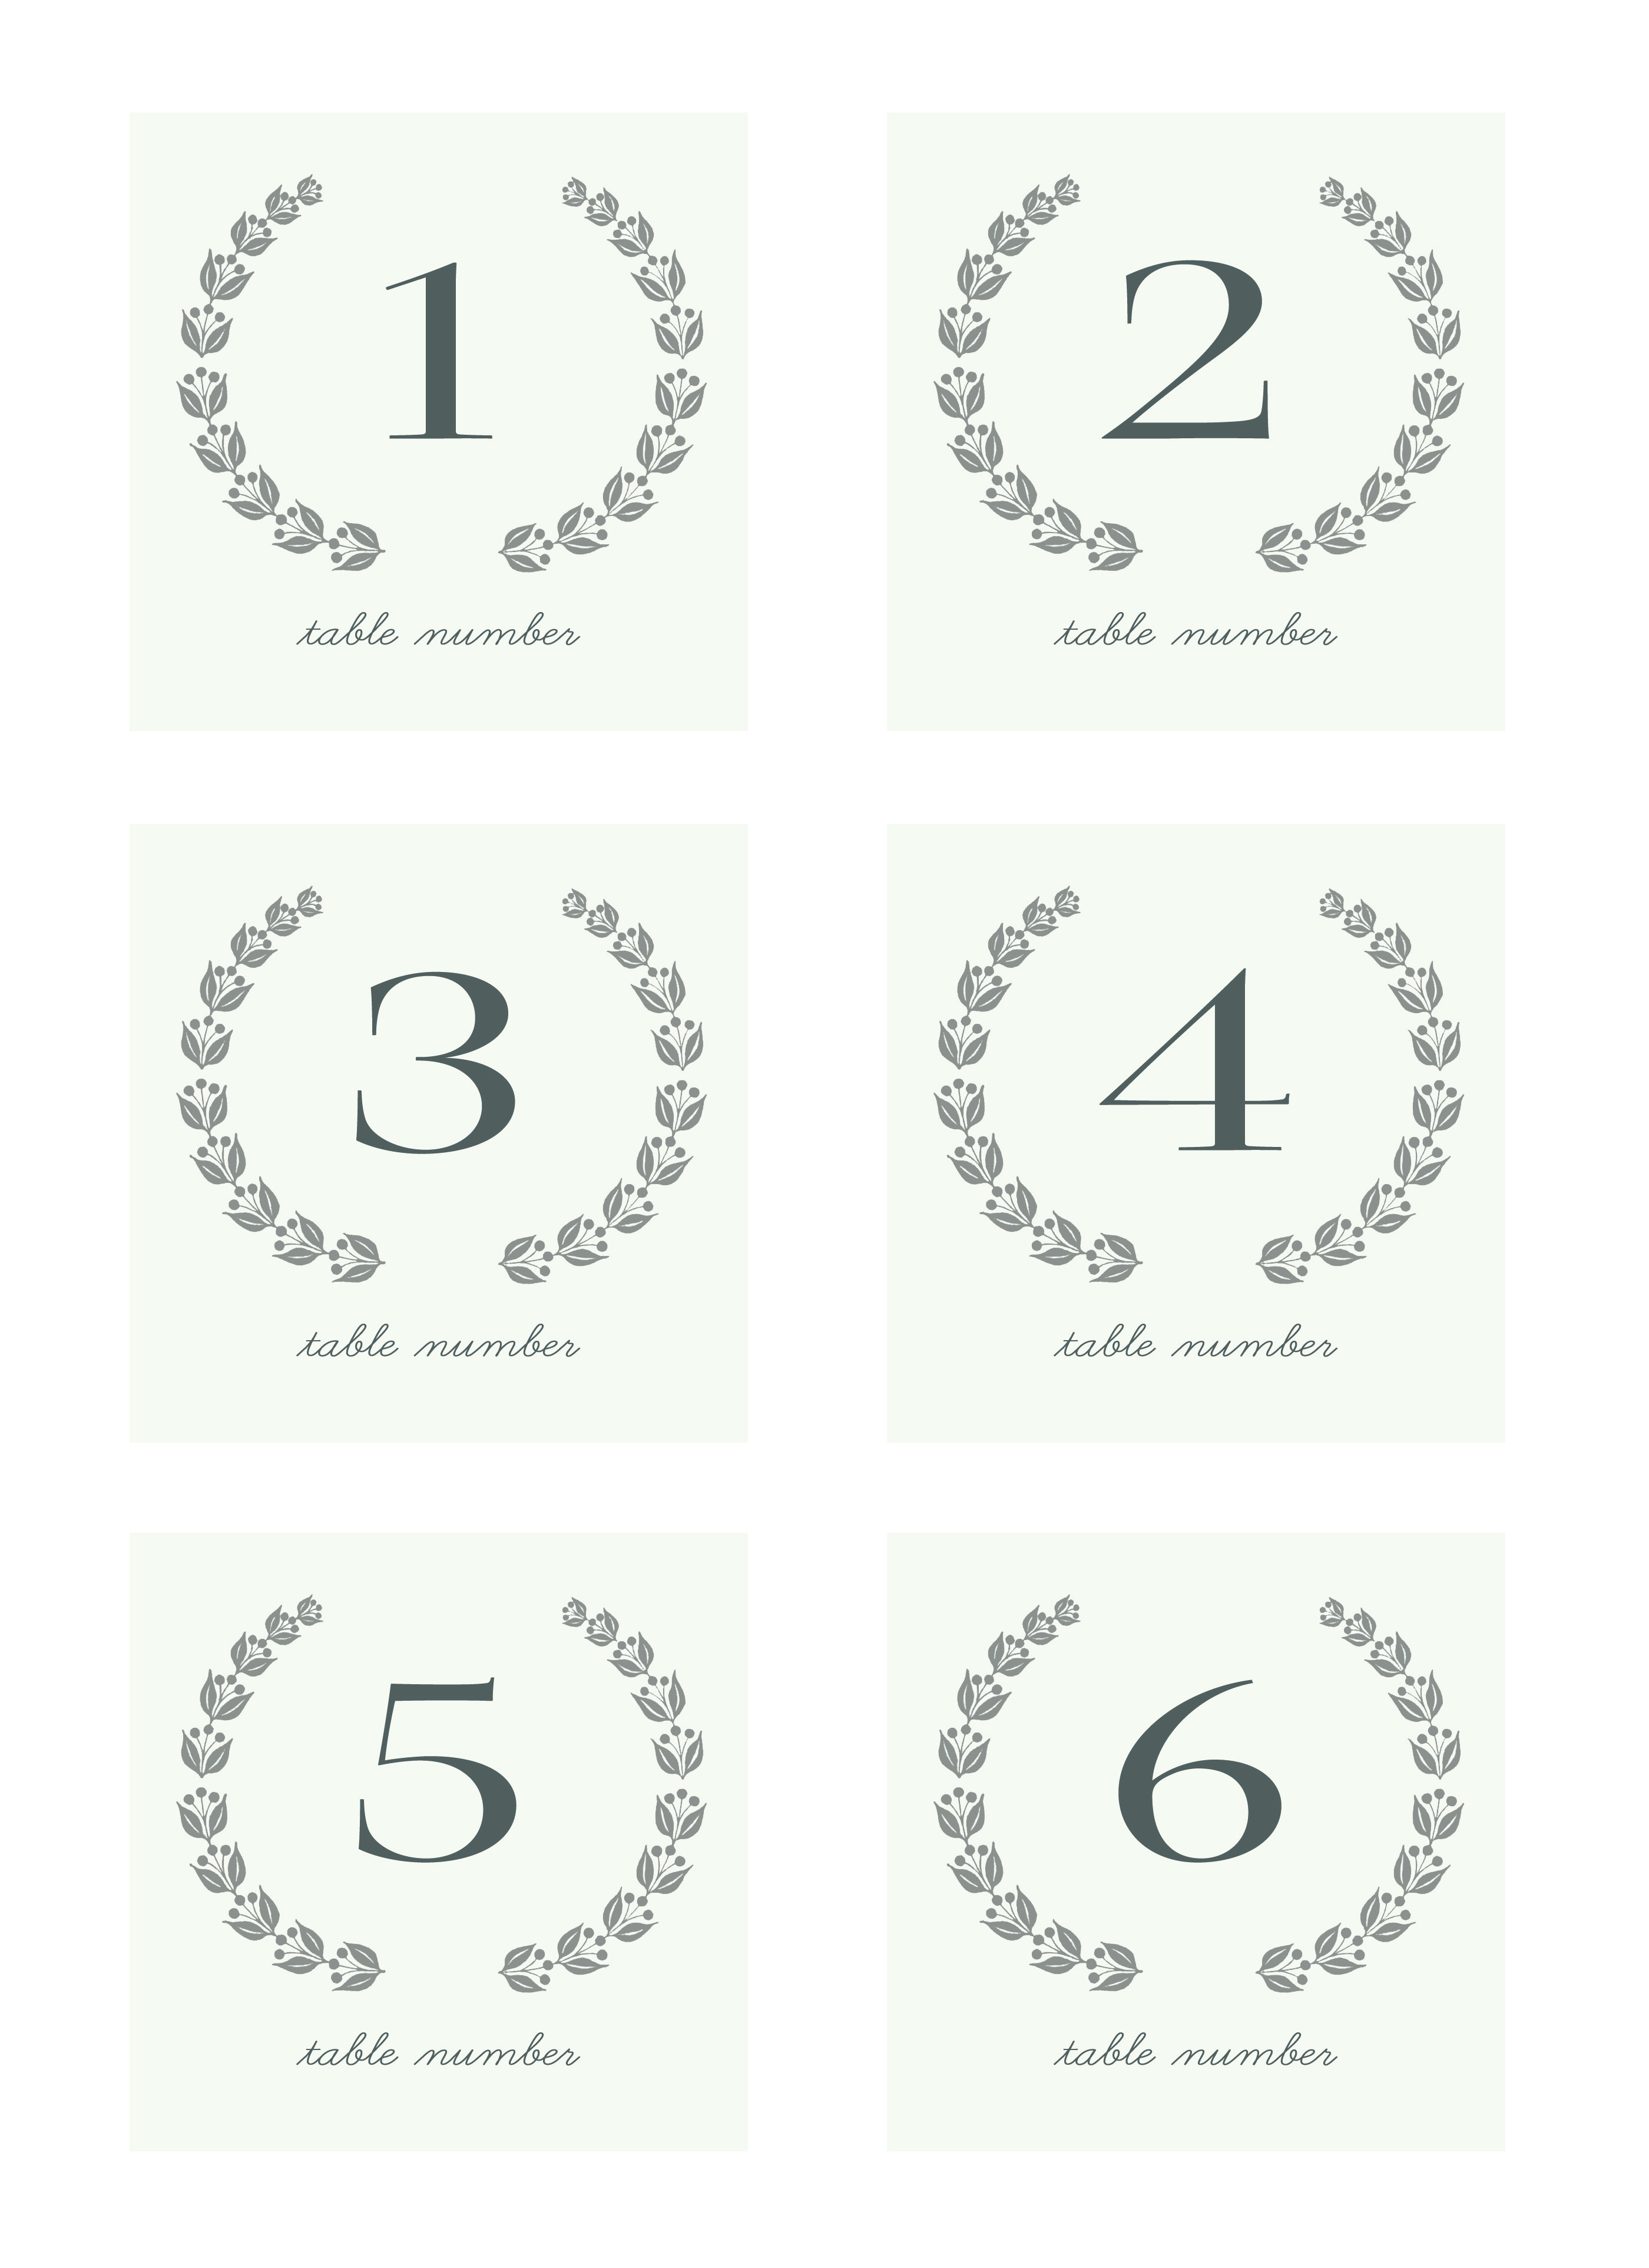 8-best-images-of-printable-wedding-table-number-templates-wedding-table-number-templates-free